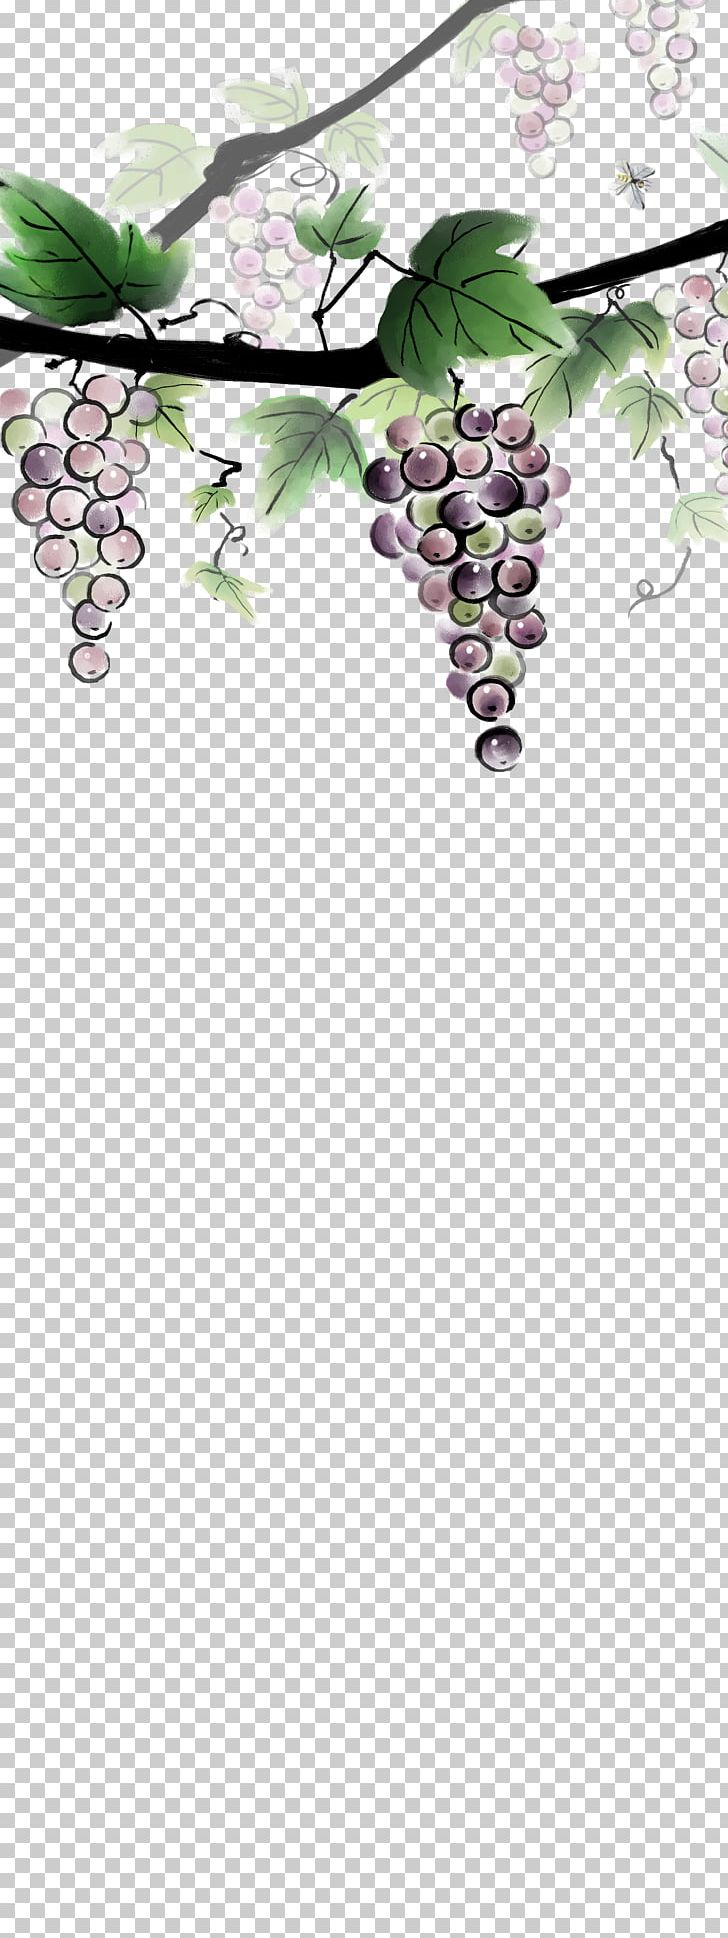 Grape Ink Wash Painting PNG, Clipart, Art, Black Grapes, Branch, Cherry Blossom, Designer Free PNG Download